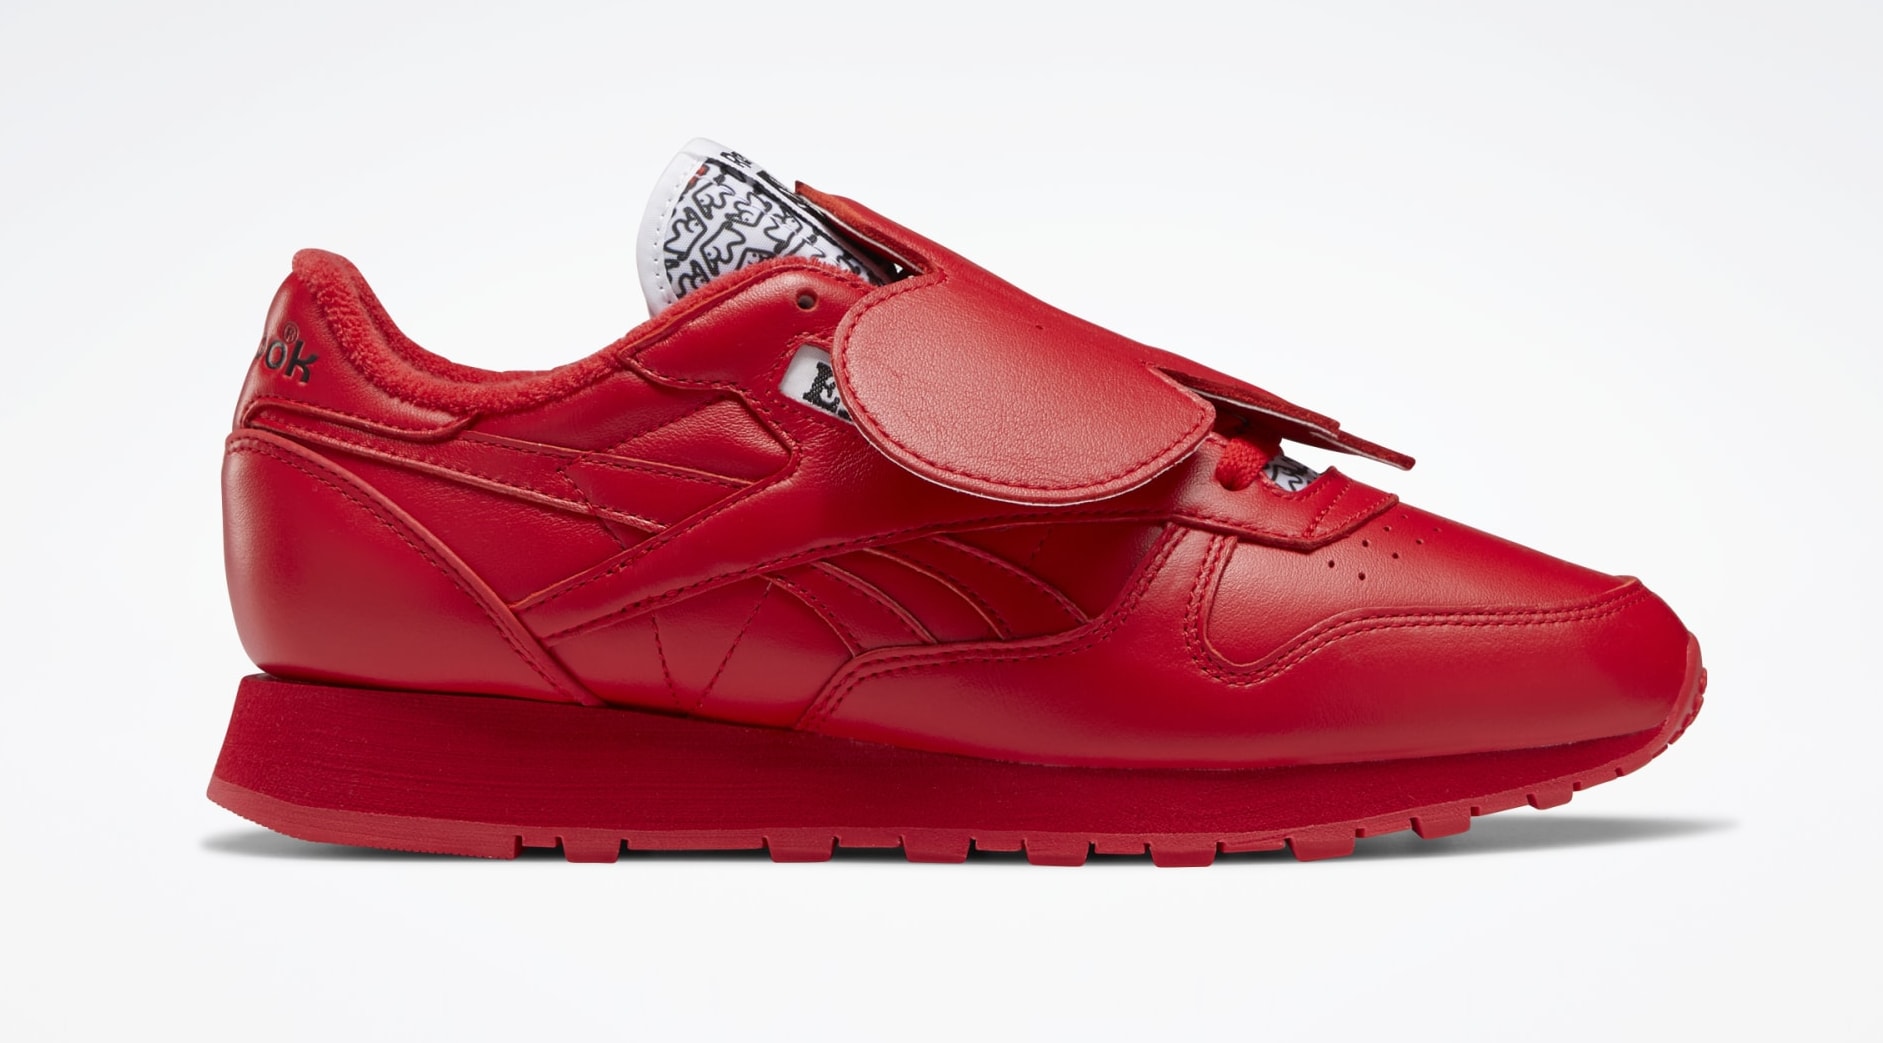 Eames x Reebok Classic Leather 'Red Elephant' GY6384 Lateral